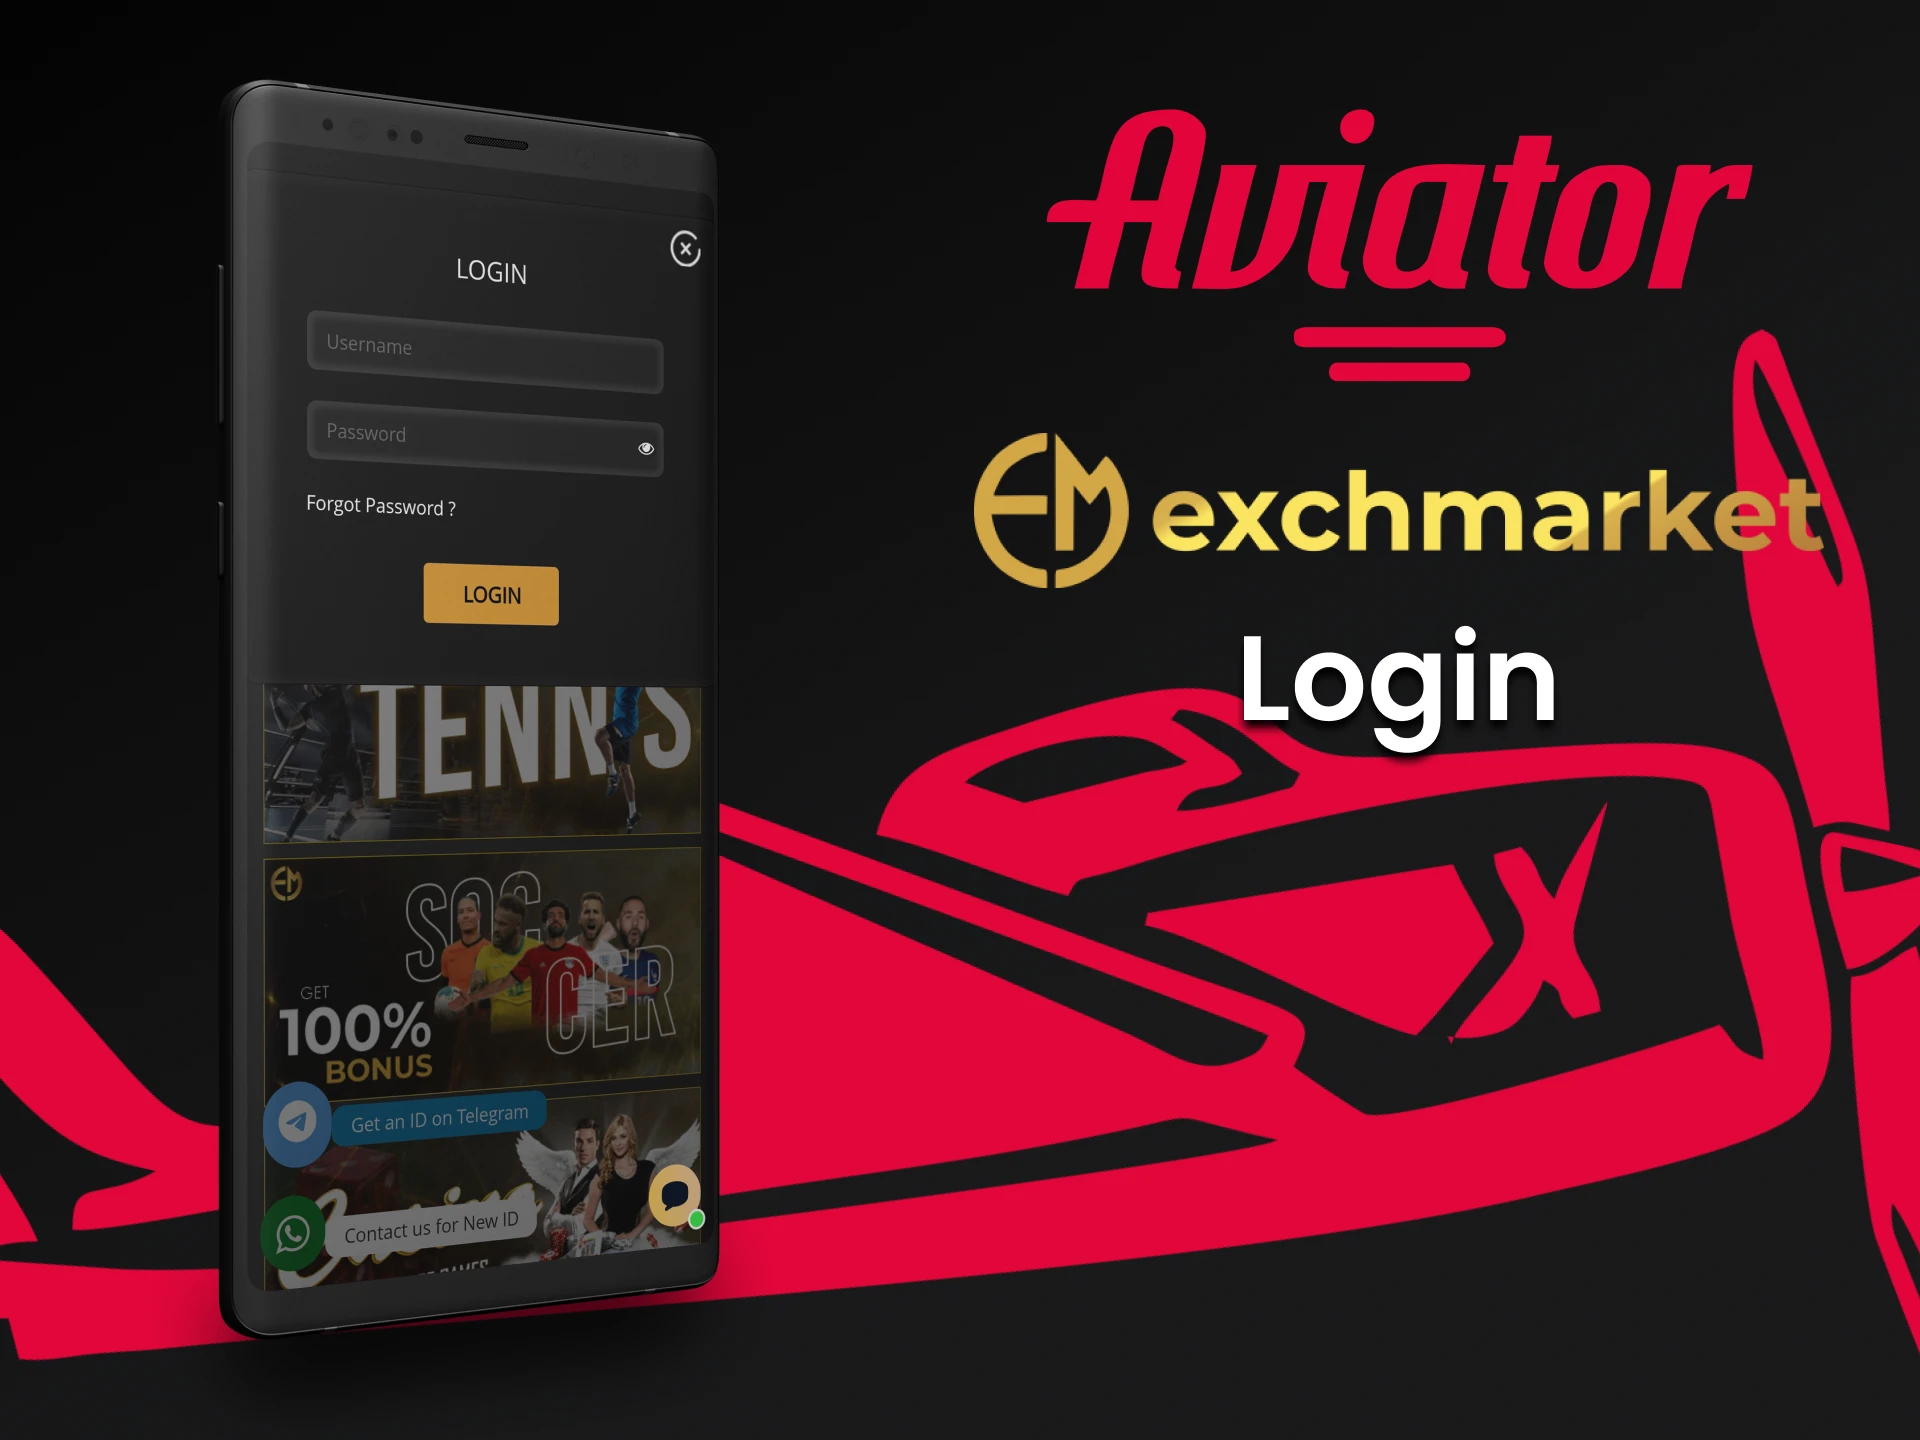 Login to your Exchmarket account to play Aviator.